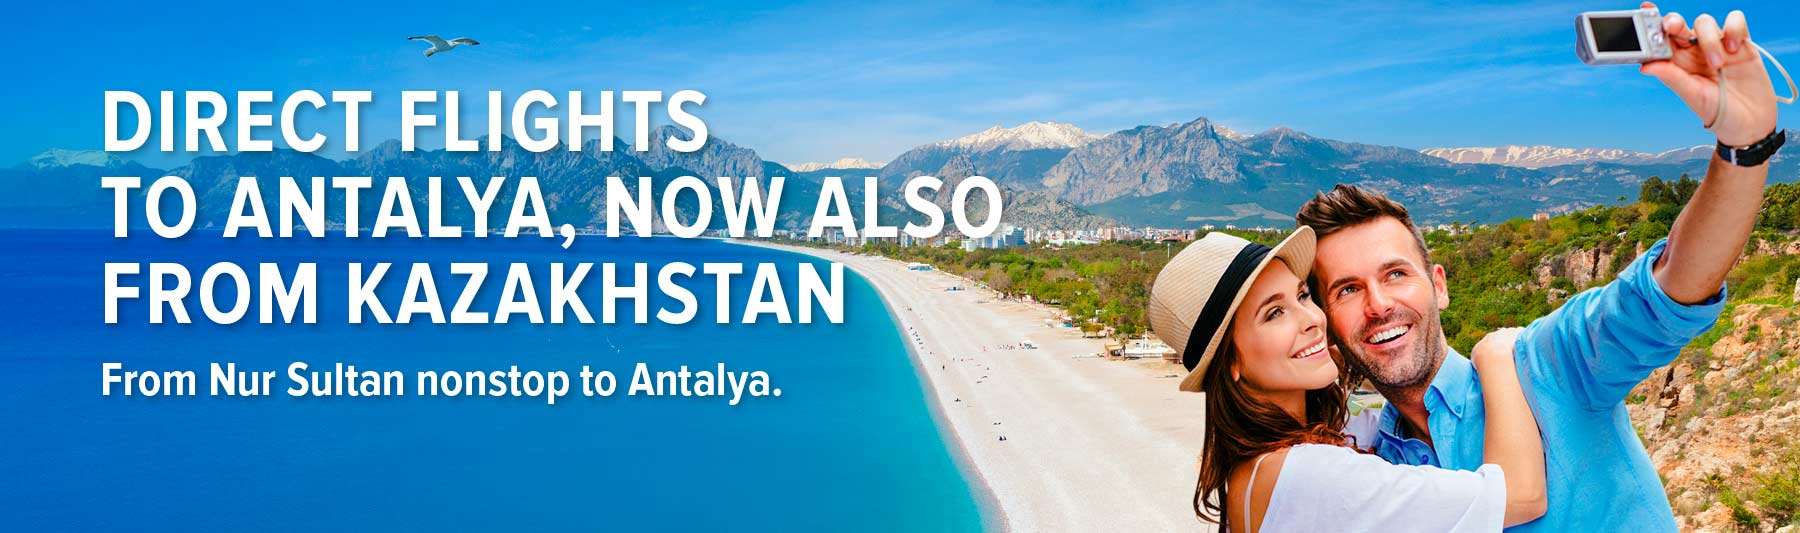 Direct flights to Antalya, now also from Kazakhstan